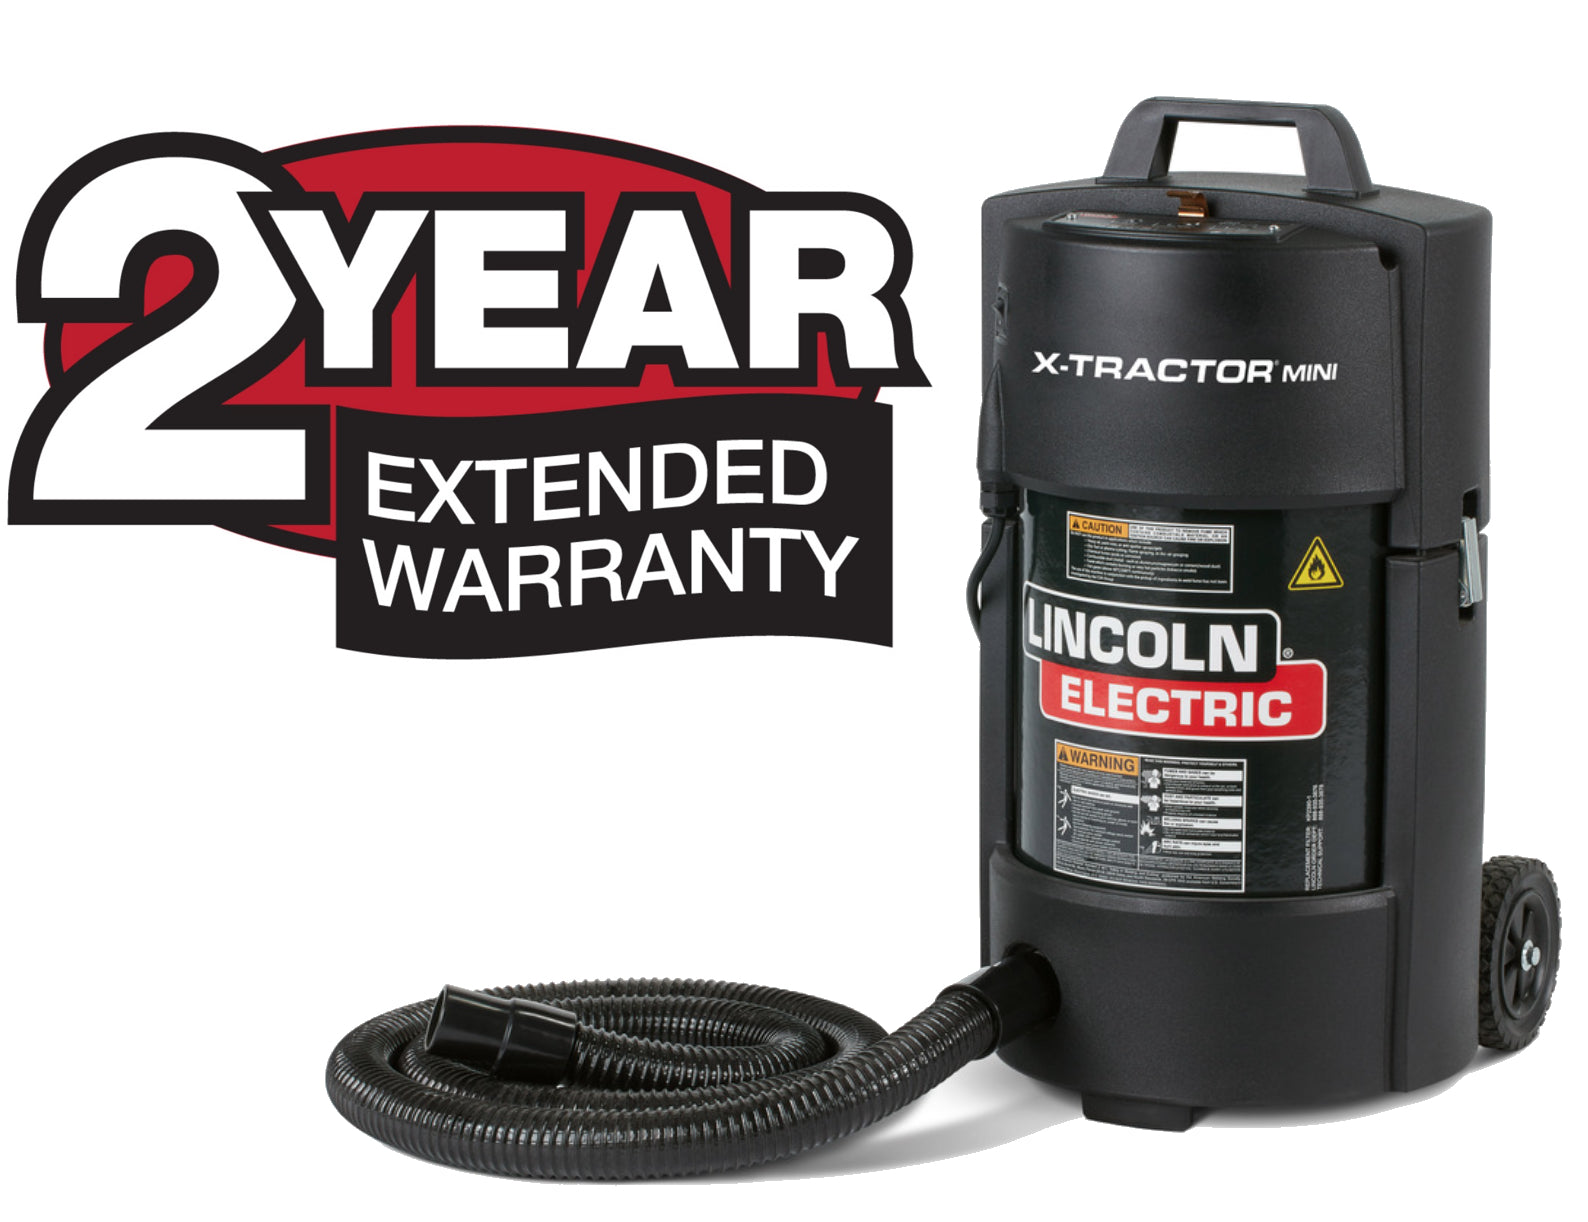 Lincoln 2-Year Extended Warranty - X-Tractor Mini X3972